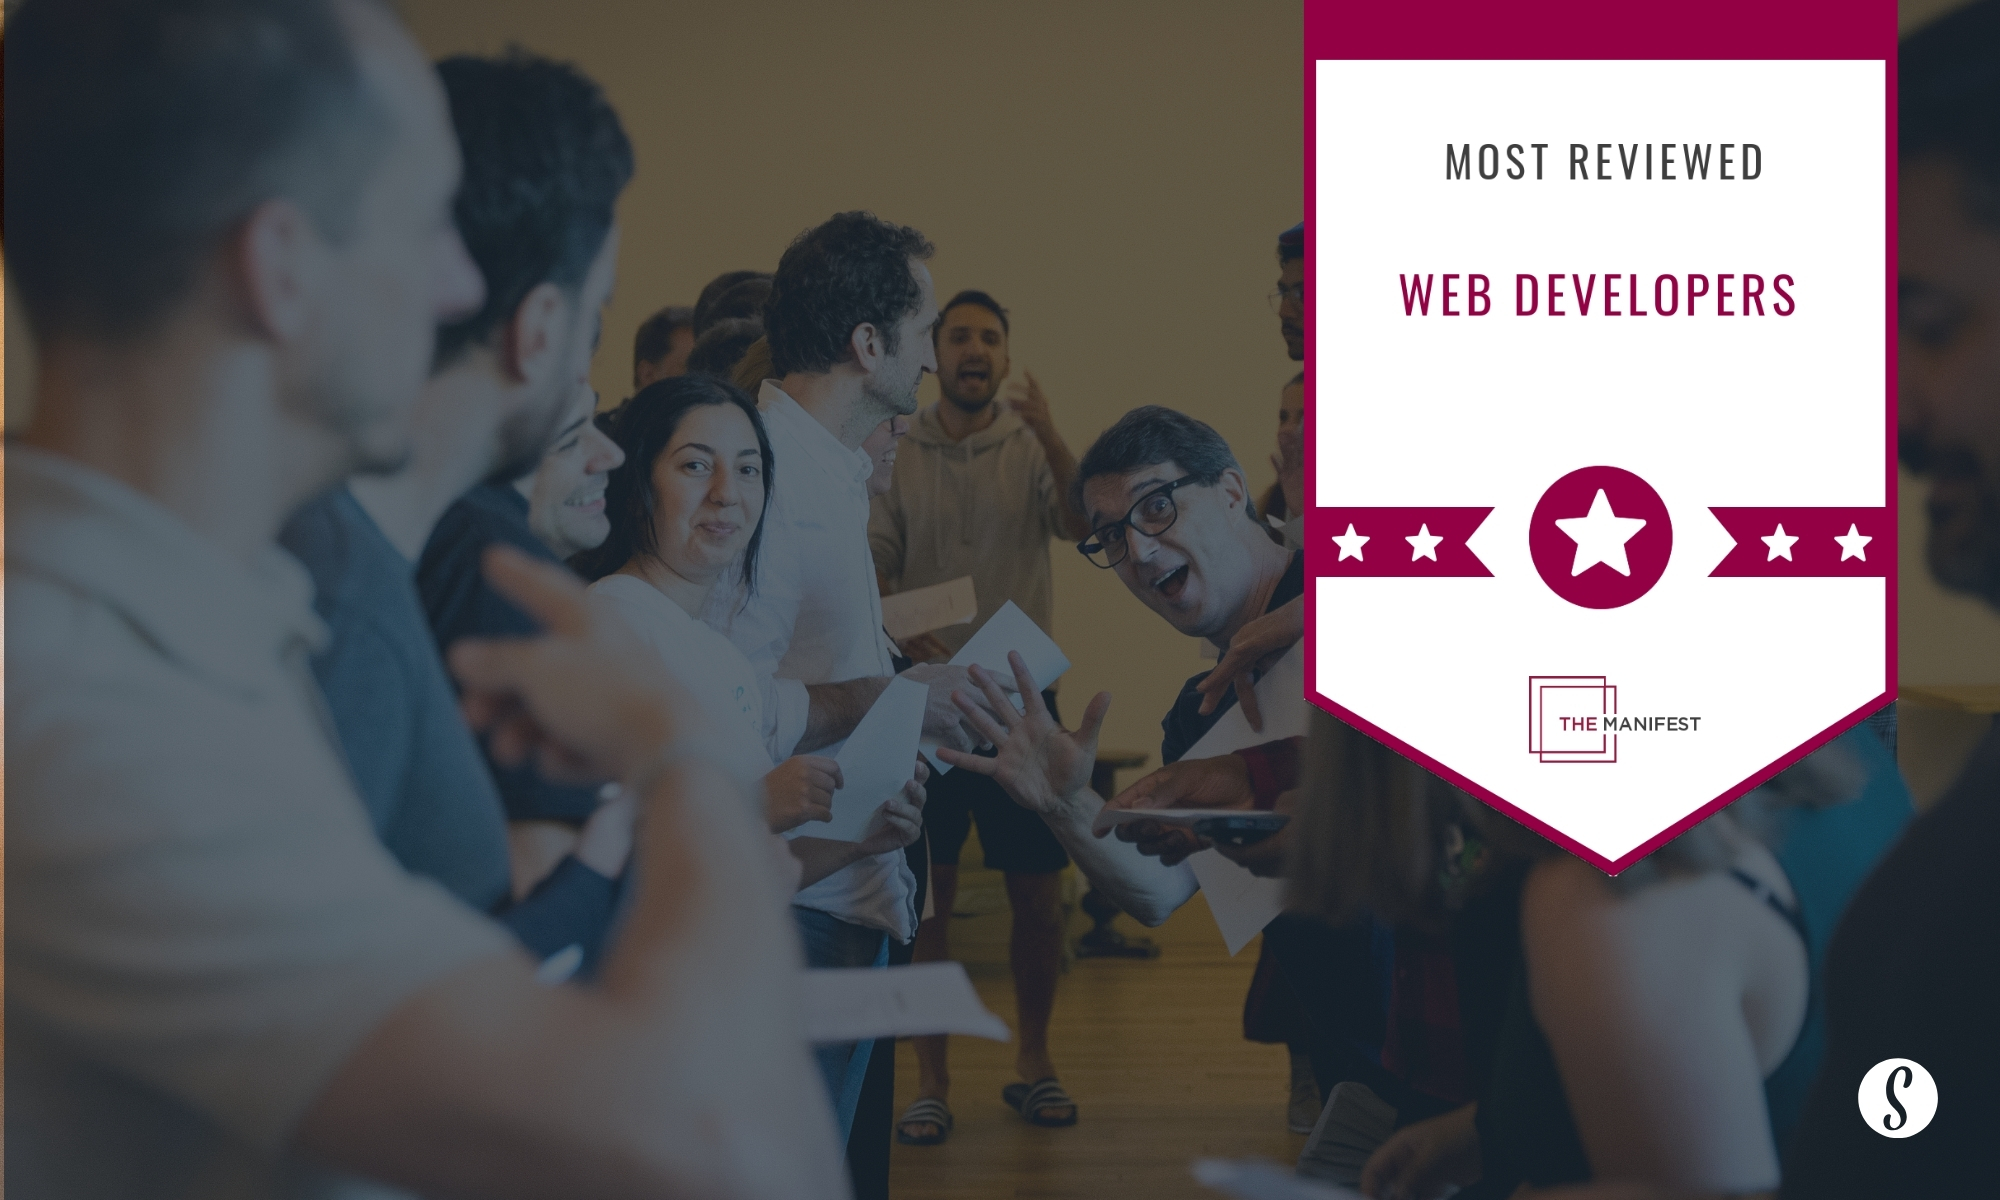 Symetris Joins the Ranks of World's Best in Web Development, According to The Manifest